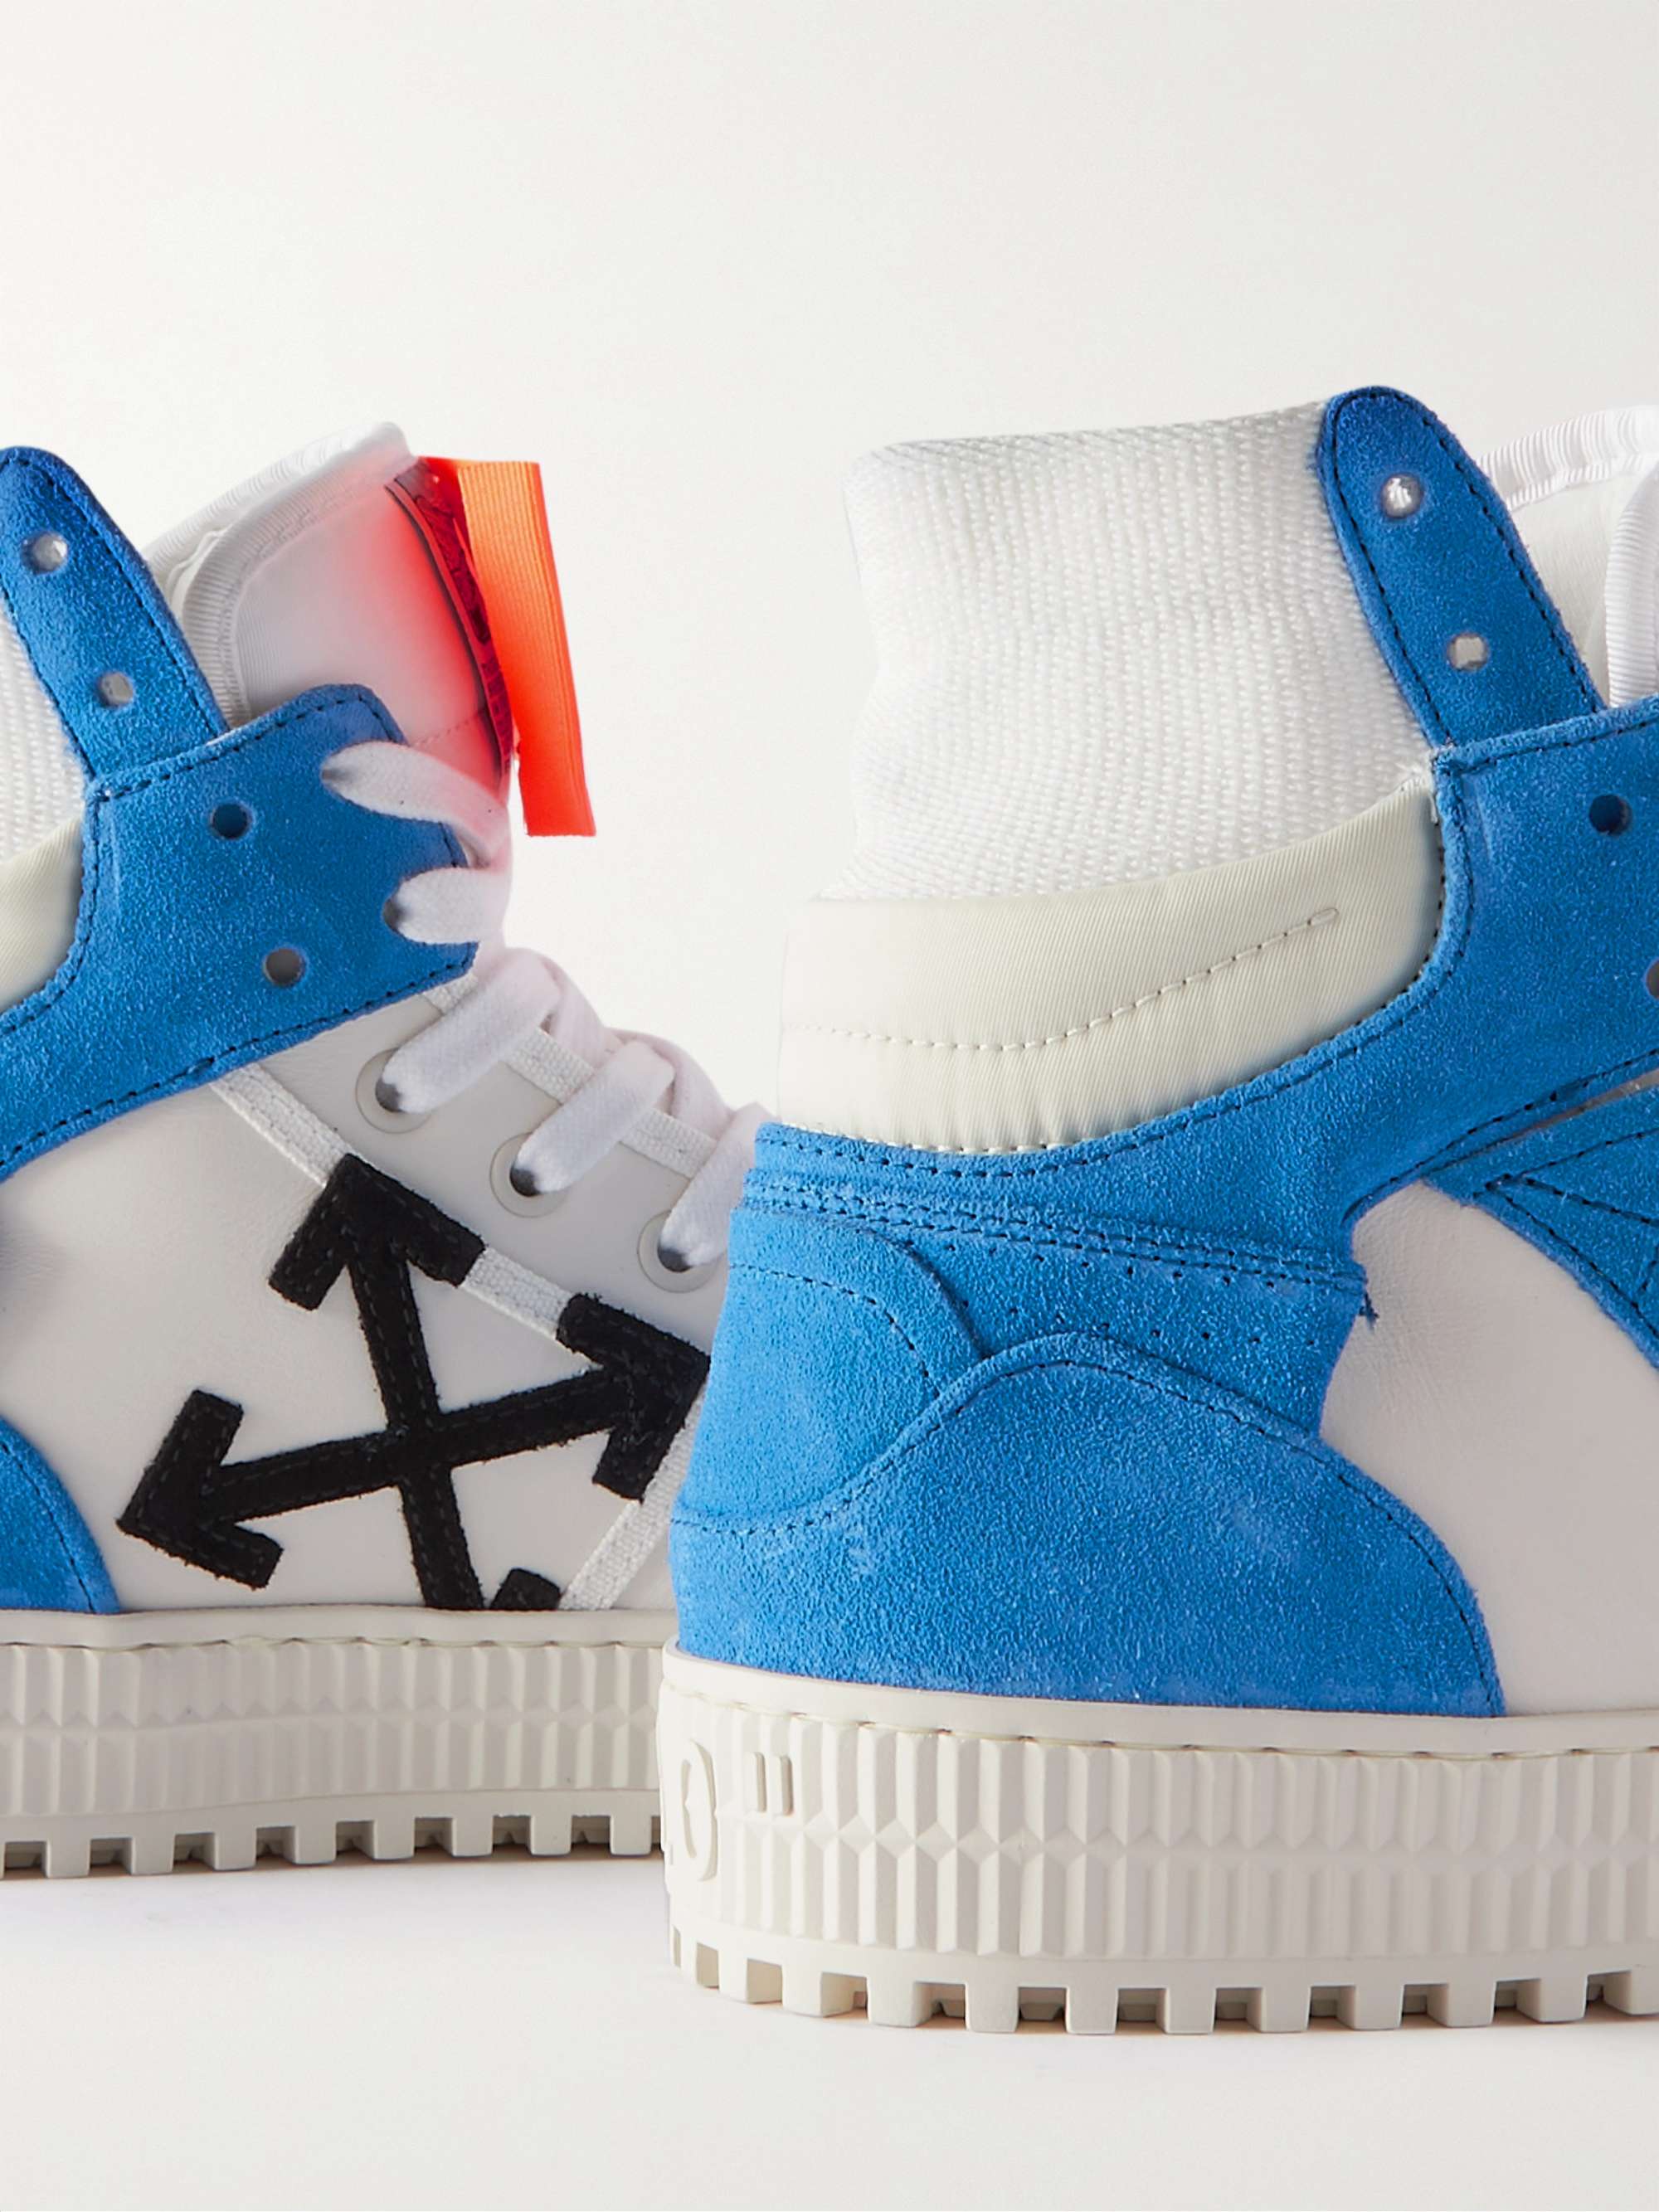 OFF-WHITE 3.0 Off Court Supreme Suede, Leather and Shell High-Top Sneakers